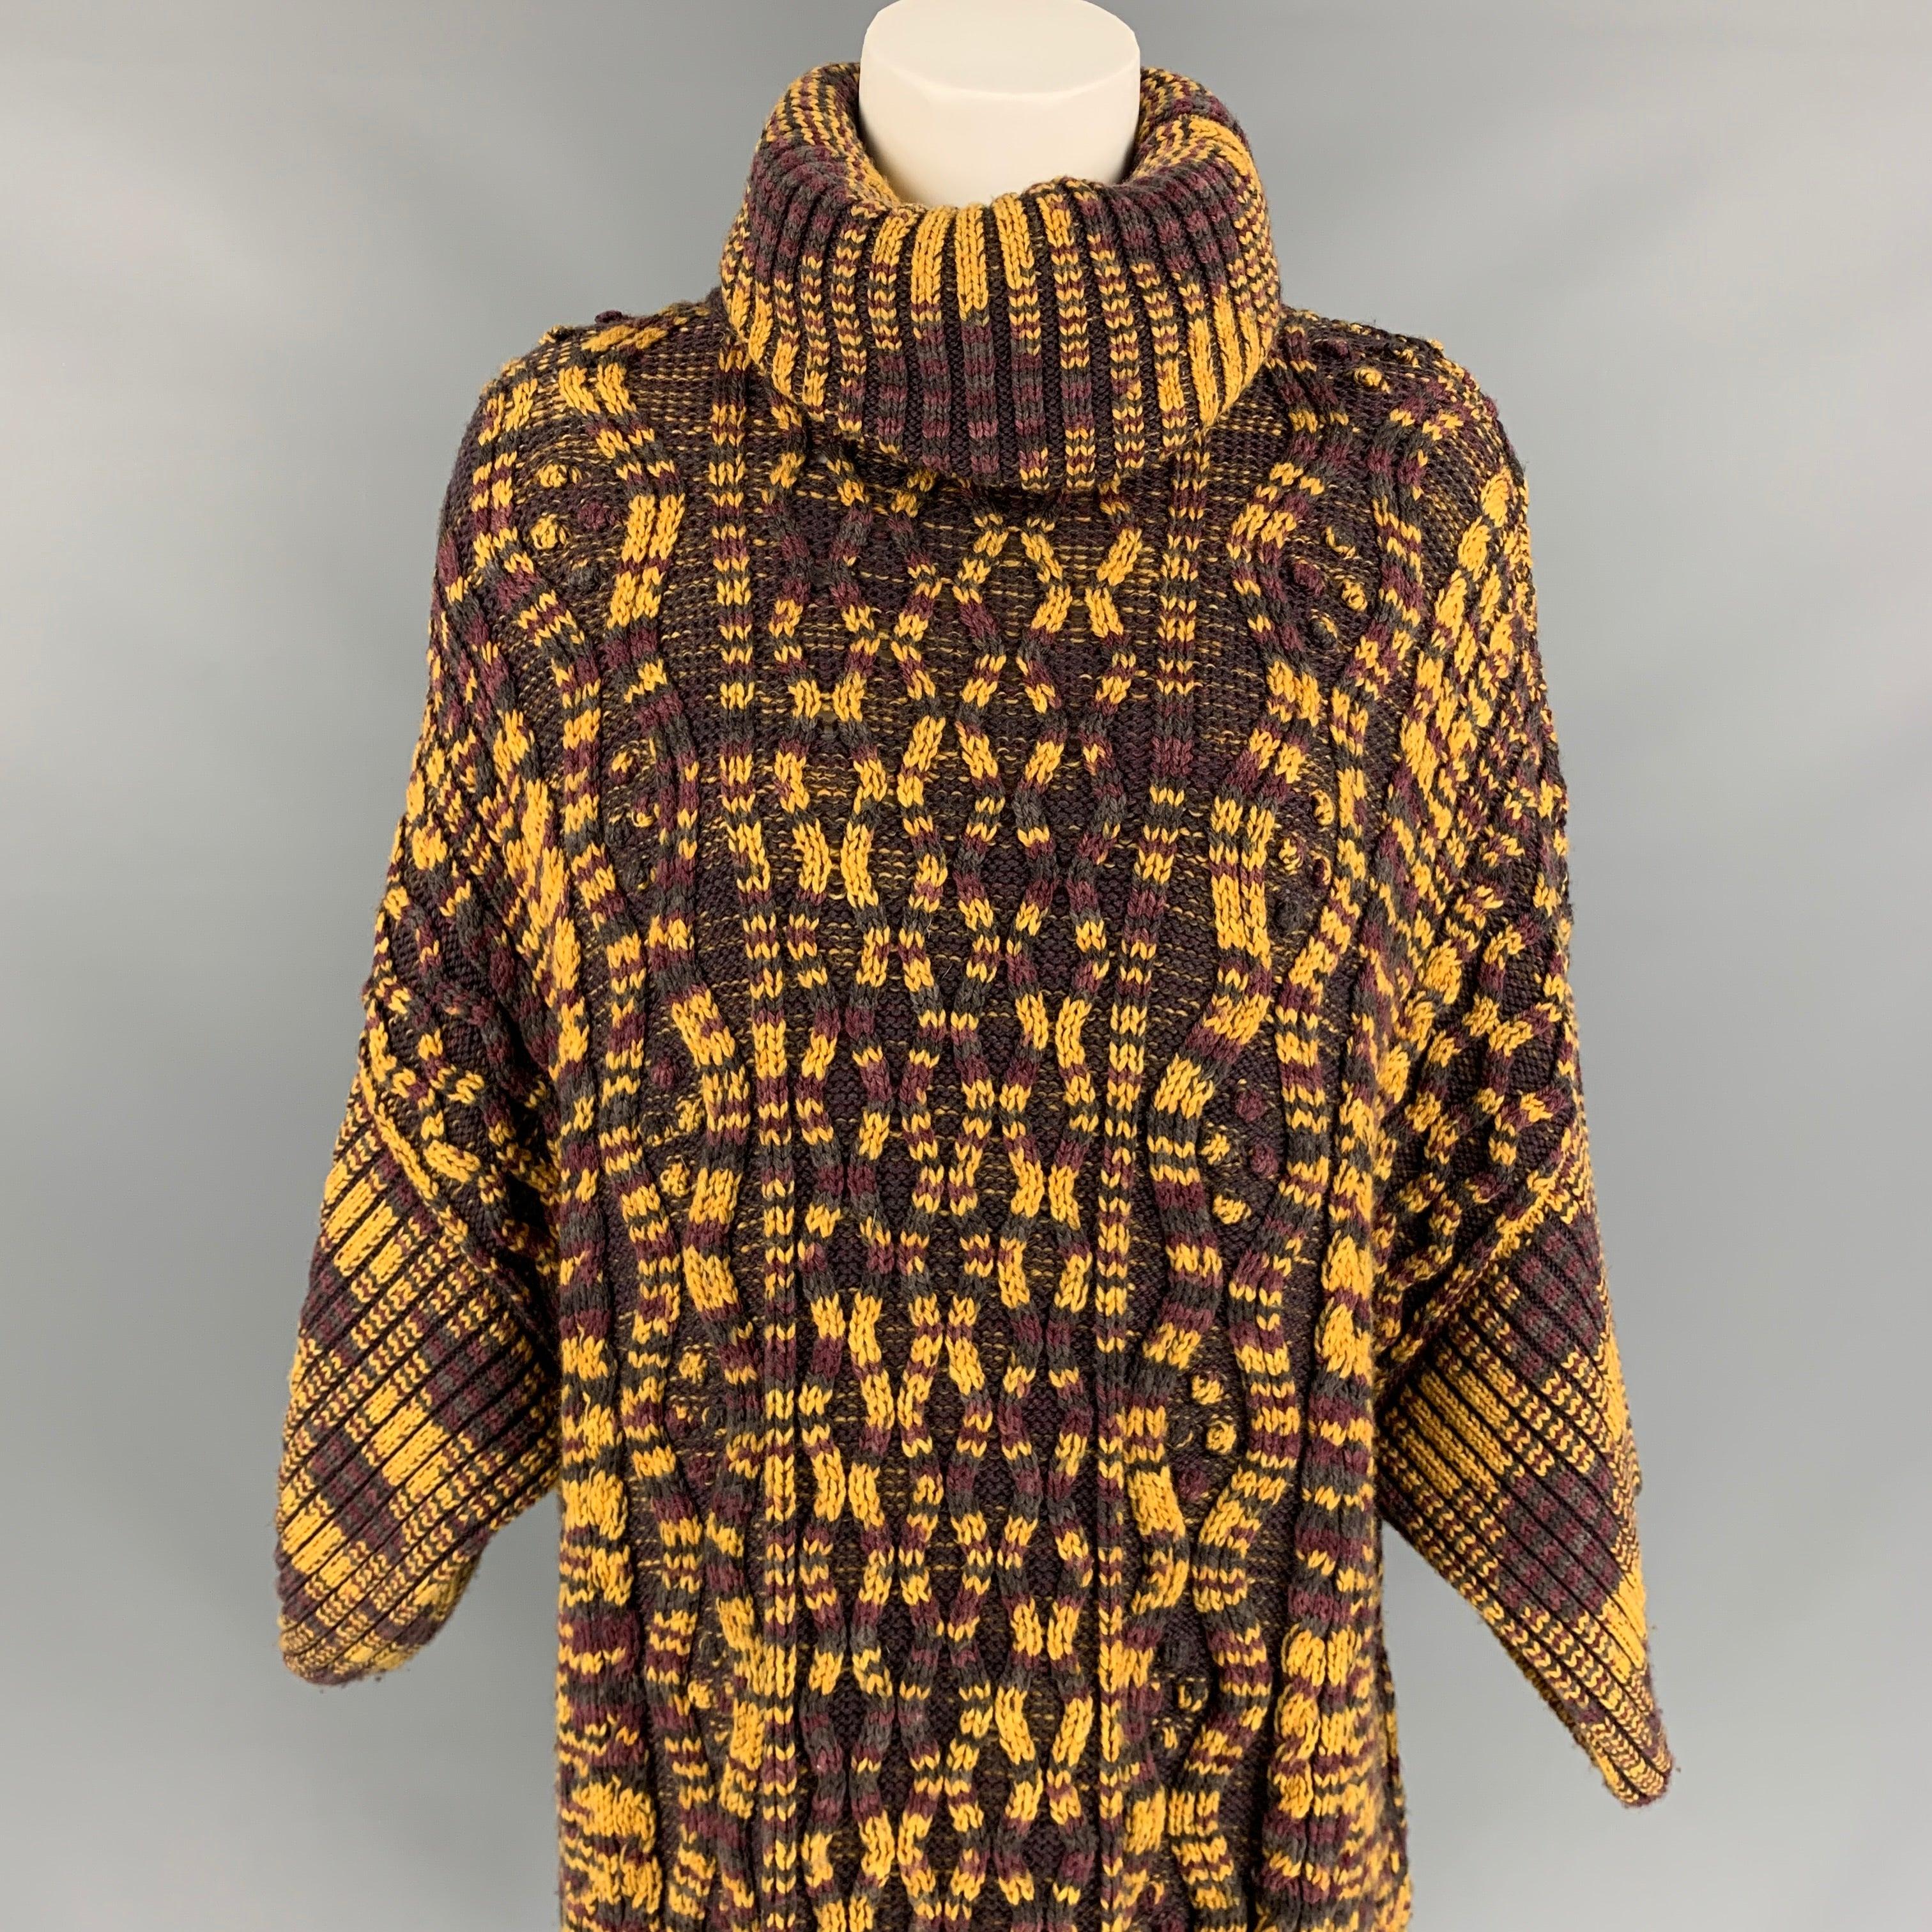 M MISSONI sweater comes in a gold & purple knitted wool blend featuring a oversized fit, 3/4 sleeves, and a turtleneck. Made in Italy. Very Good Pre-Owned Condition. 

Marked:   M 

Measurements: 
 
Shoulder: 27 inches  Bust: 44 inches  Sleeve: 9.5